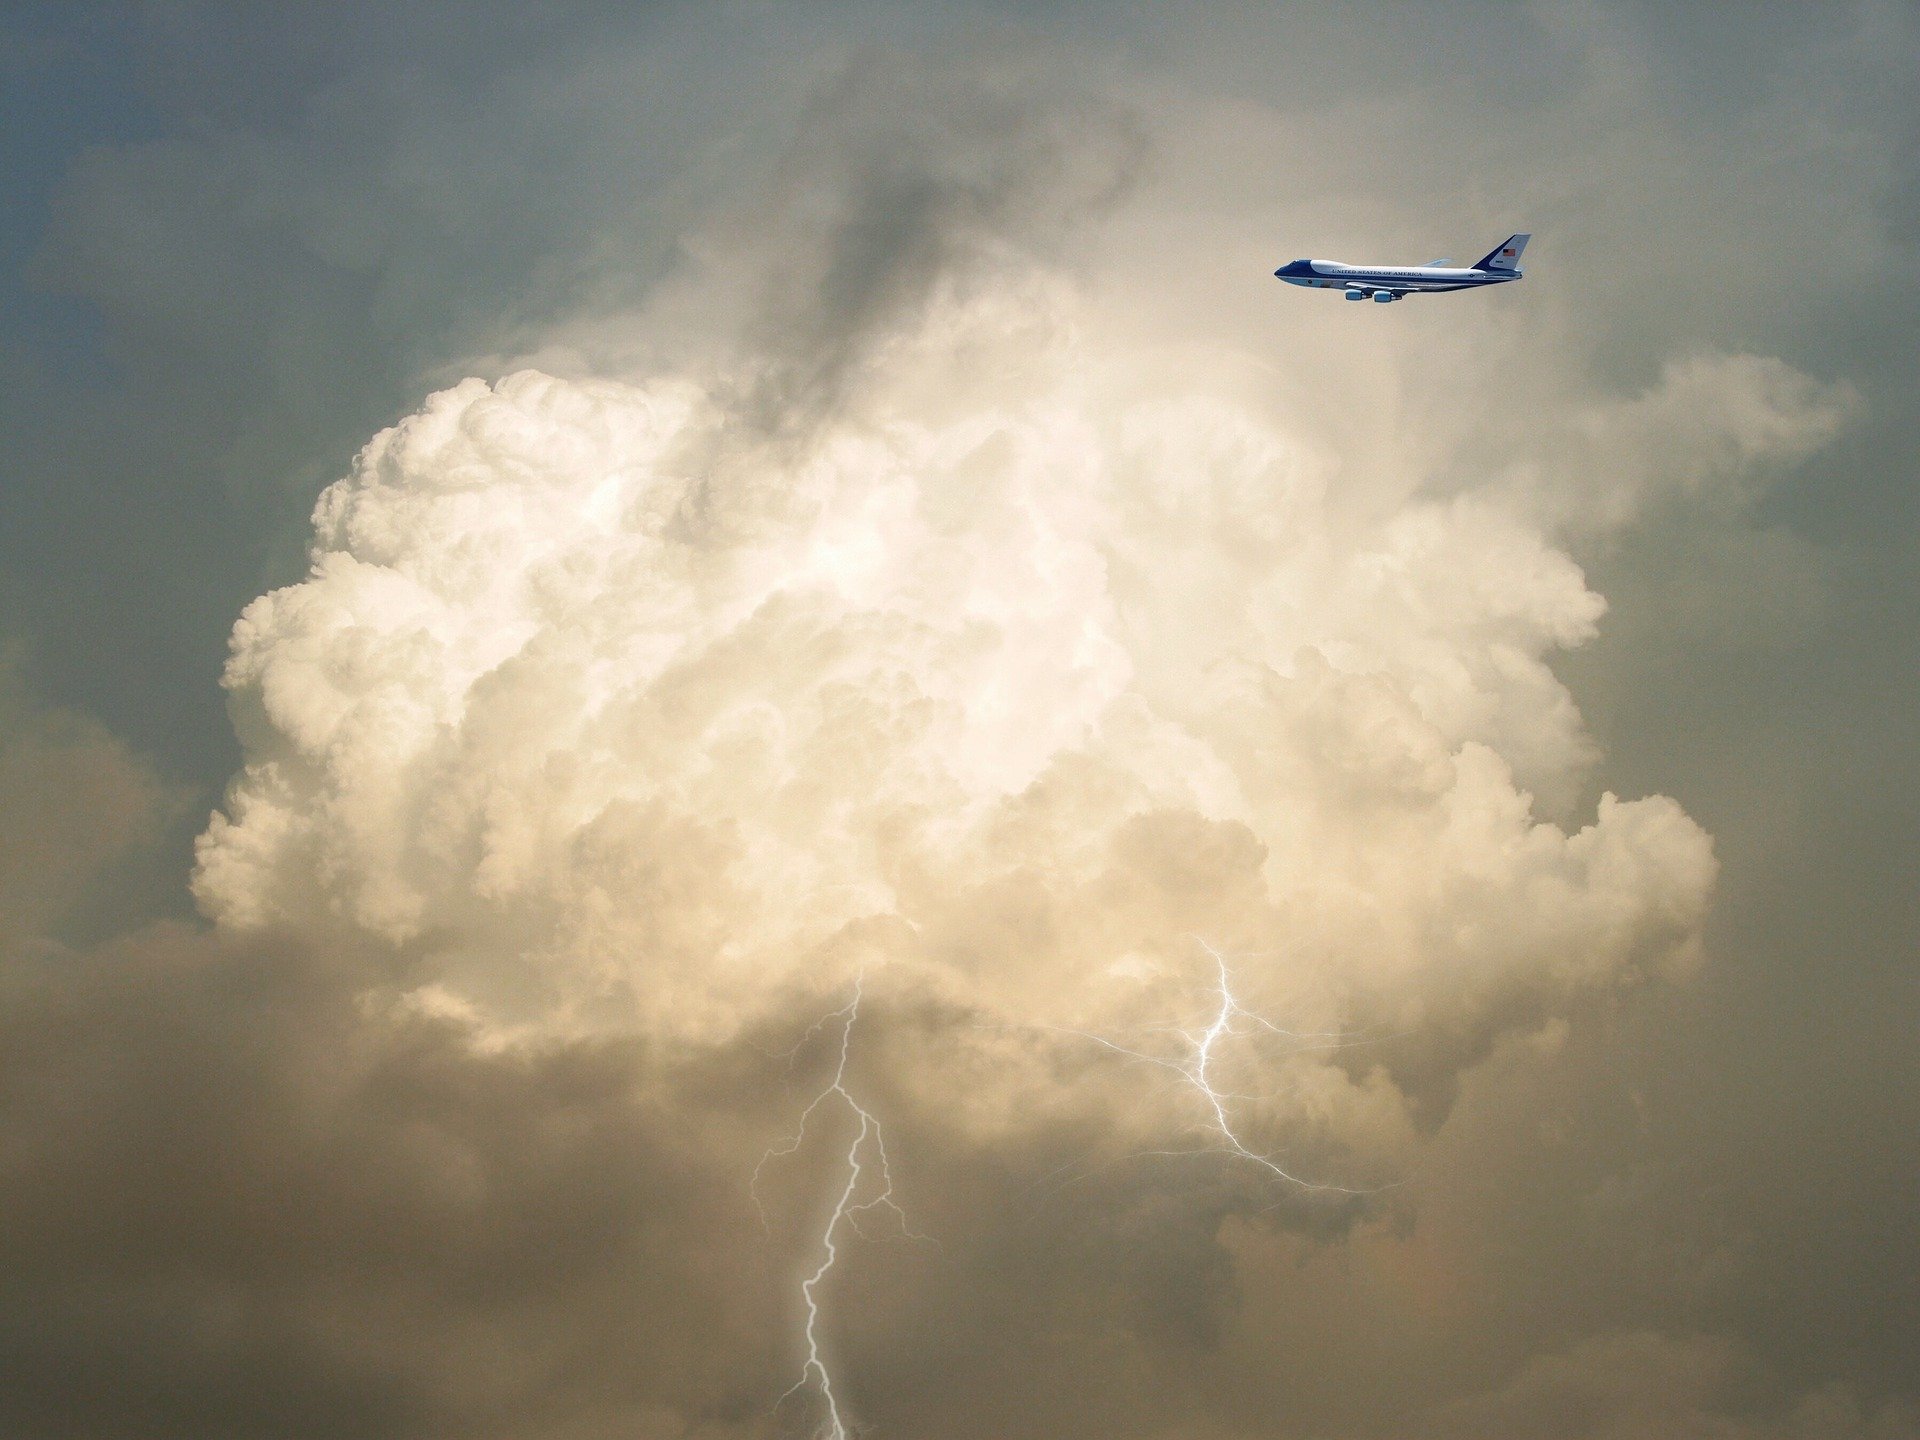 Planes are struck by lightning more often than you'd think -- here's how  they handle it